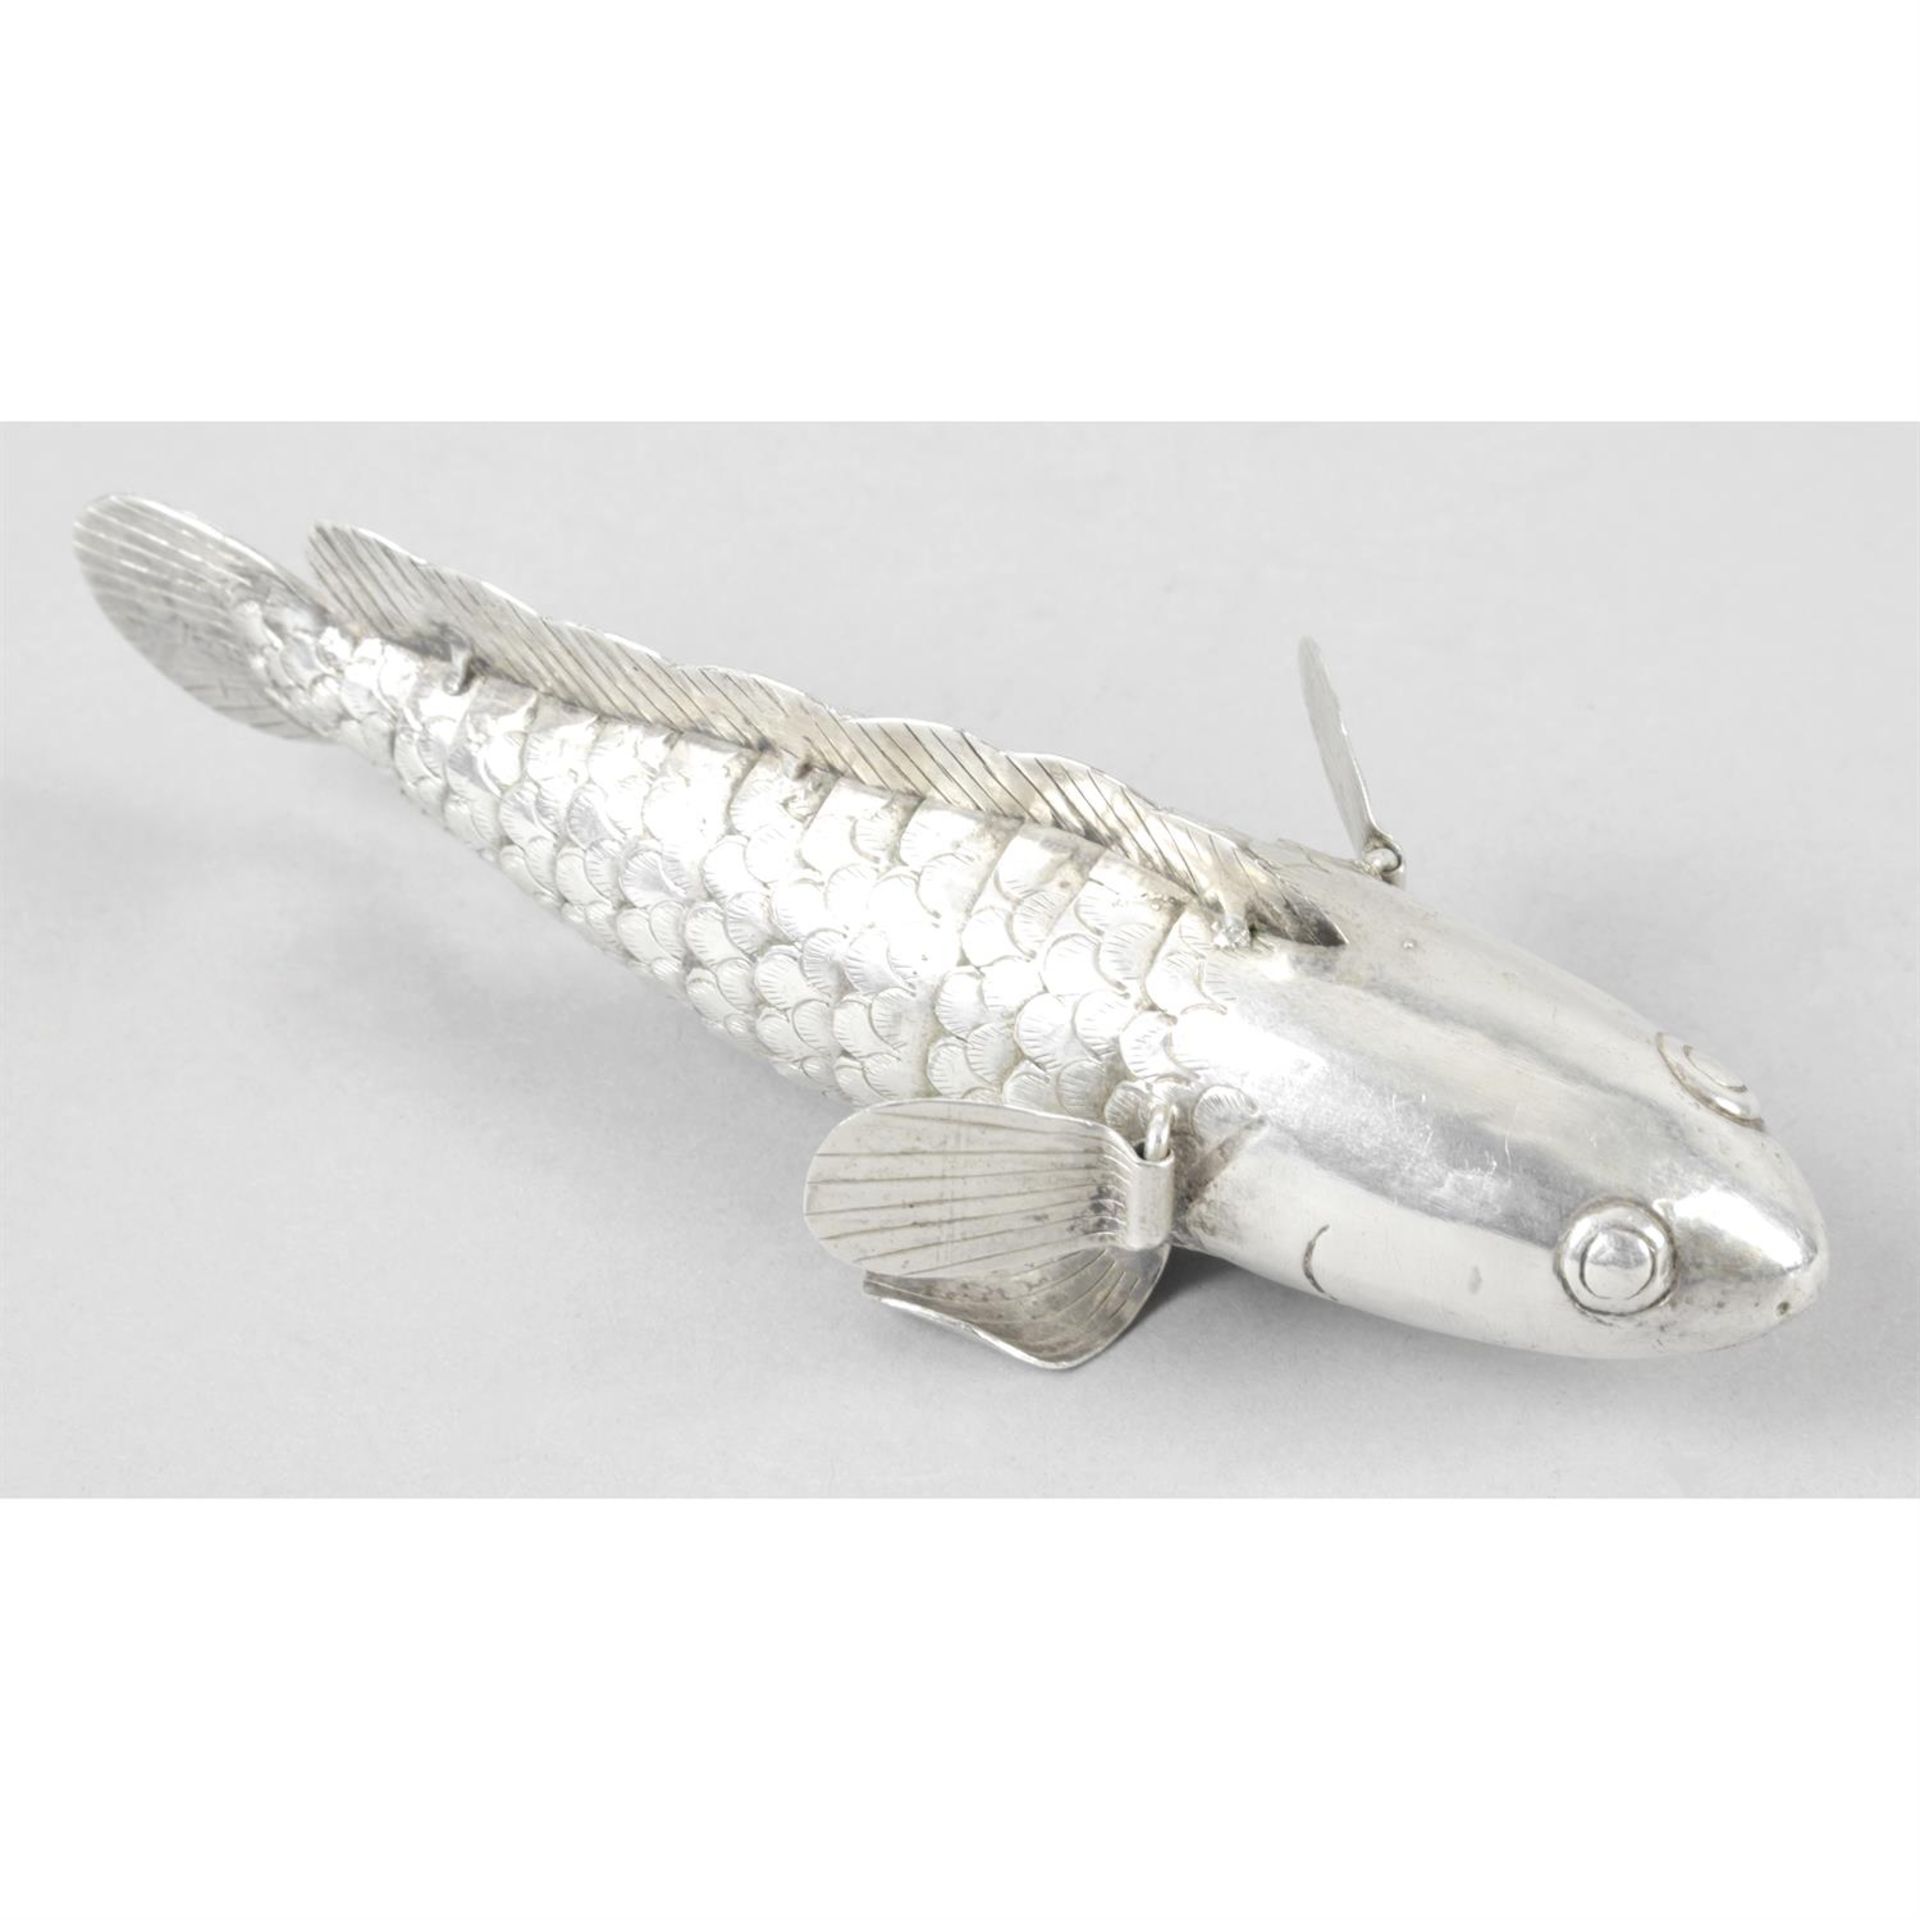 A novelty articulated figure of a fish.